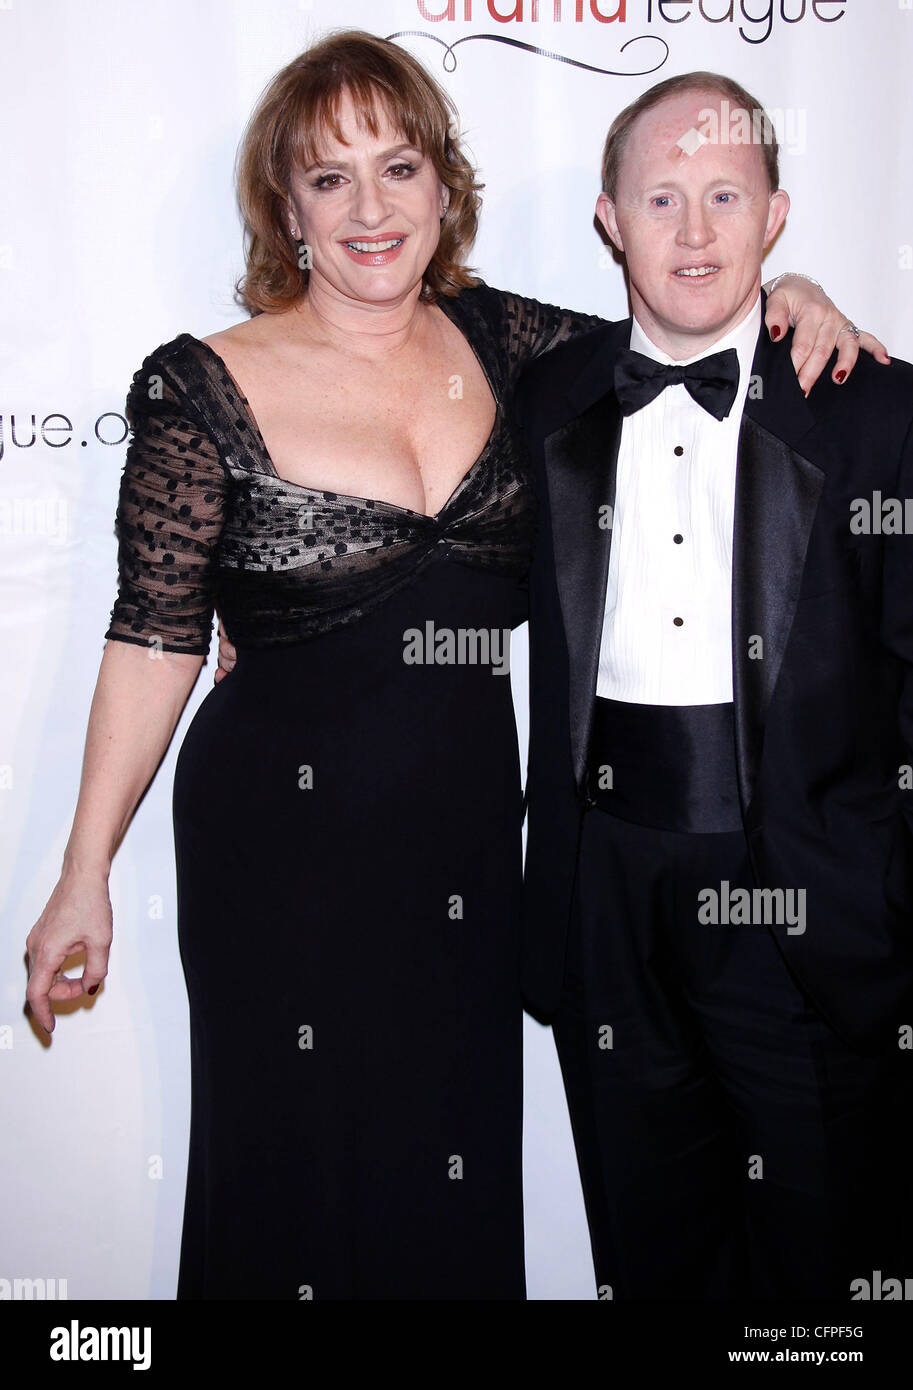 Patti LuPone and Chris Burke The Drama League's tribute to Patti LuPone held at the Pierre Hotel - Arrivals New York City, USA - 07.02.11 Stock Photo